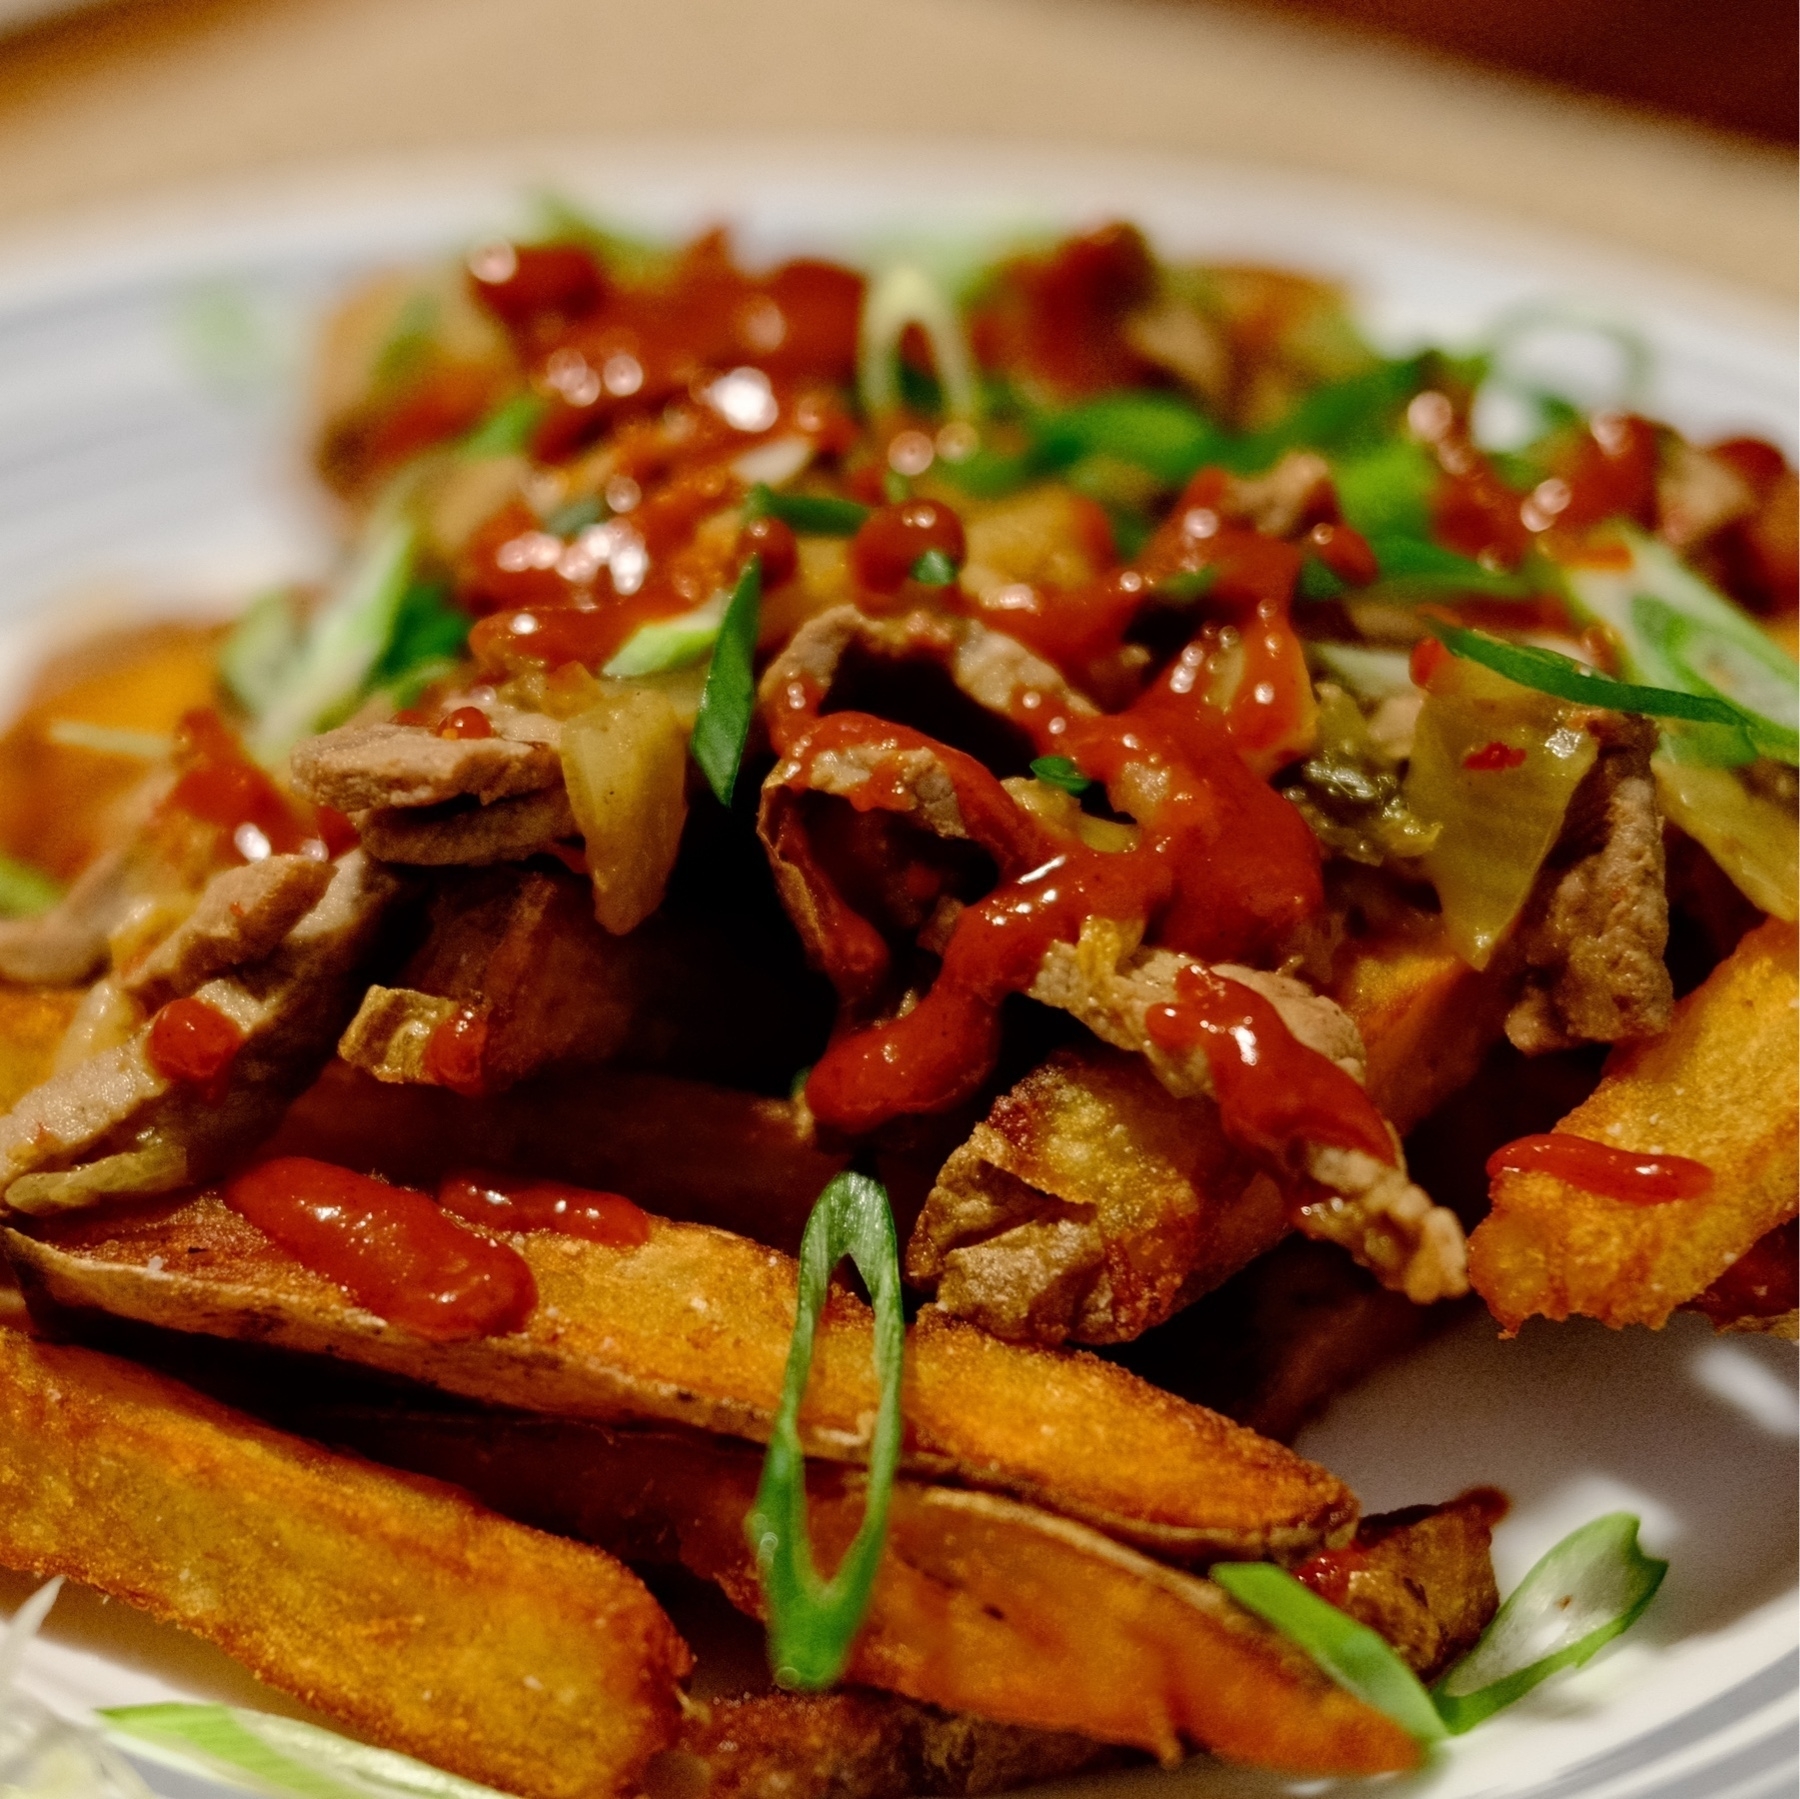 golden fries with sliced Bulgogi (marinated steak), red gochujang based sauce, topped with chives.